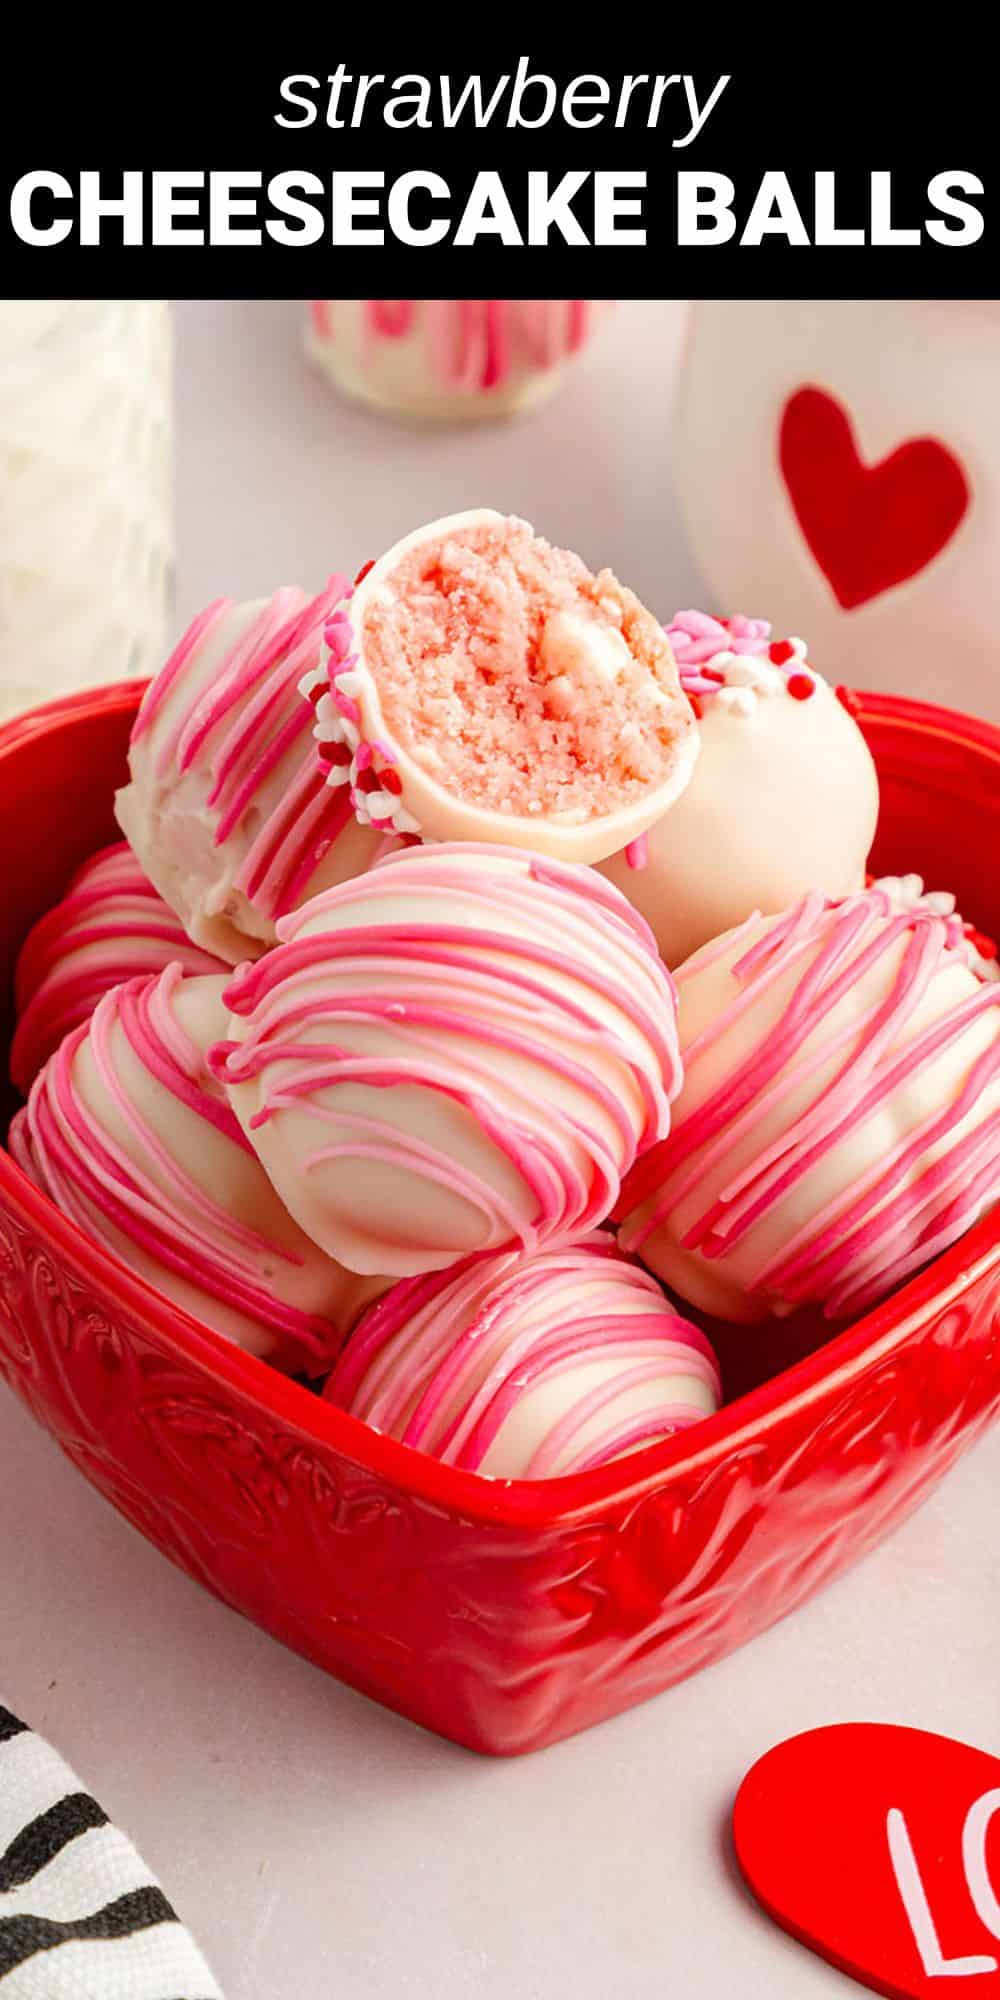 This easy recipe for Strawberry Cheesecake Balls makes delightful little bite-size bursts of pink sweetness full of strawberry flavor.